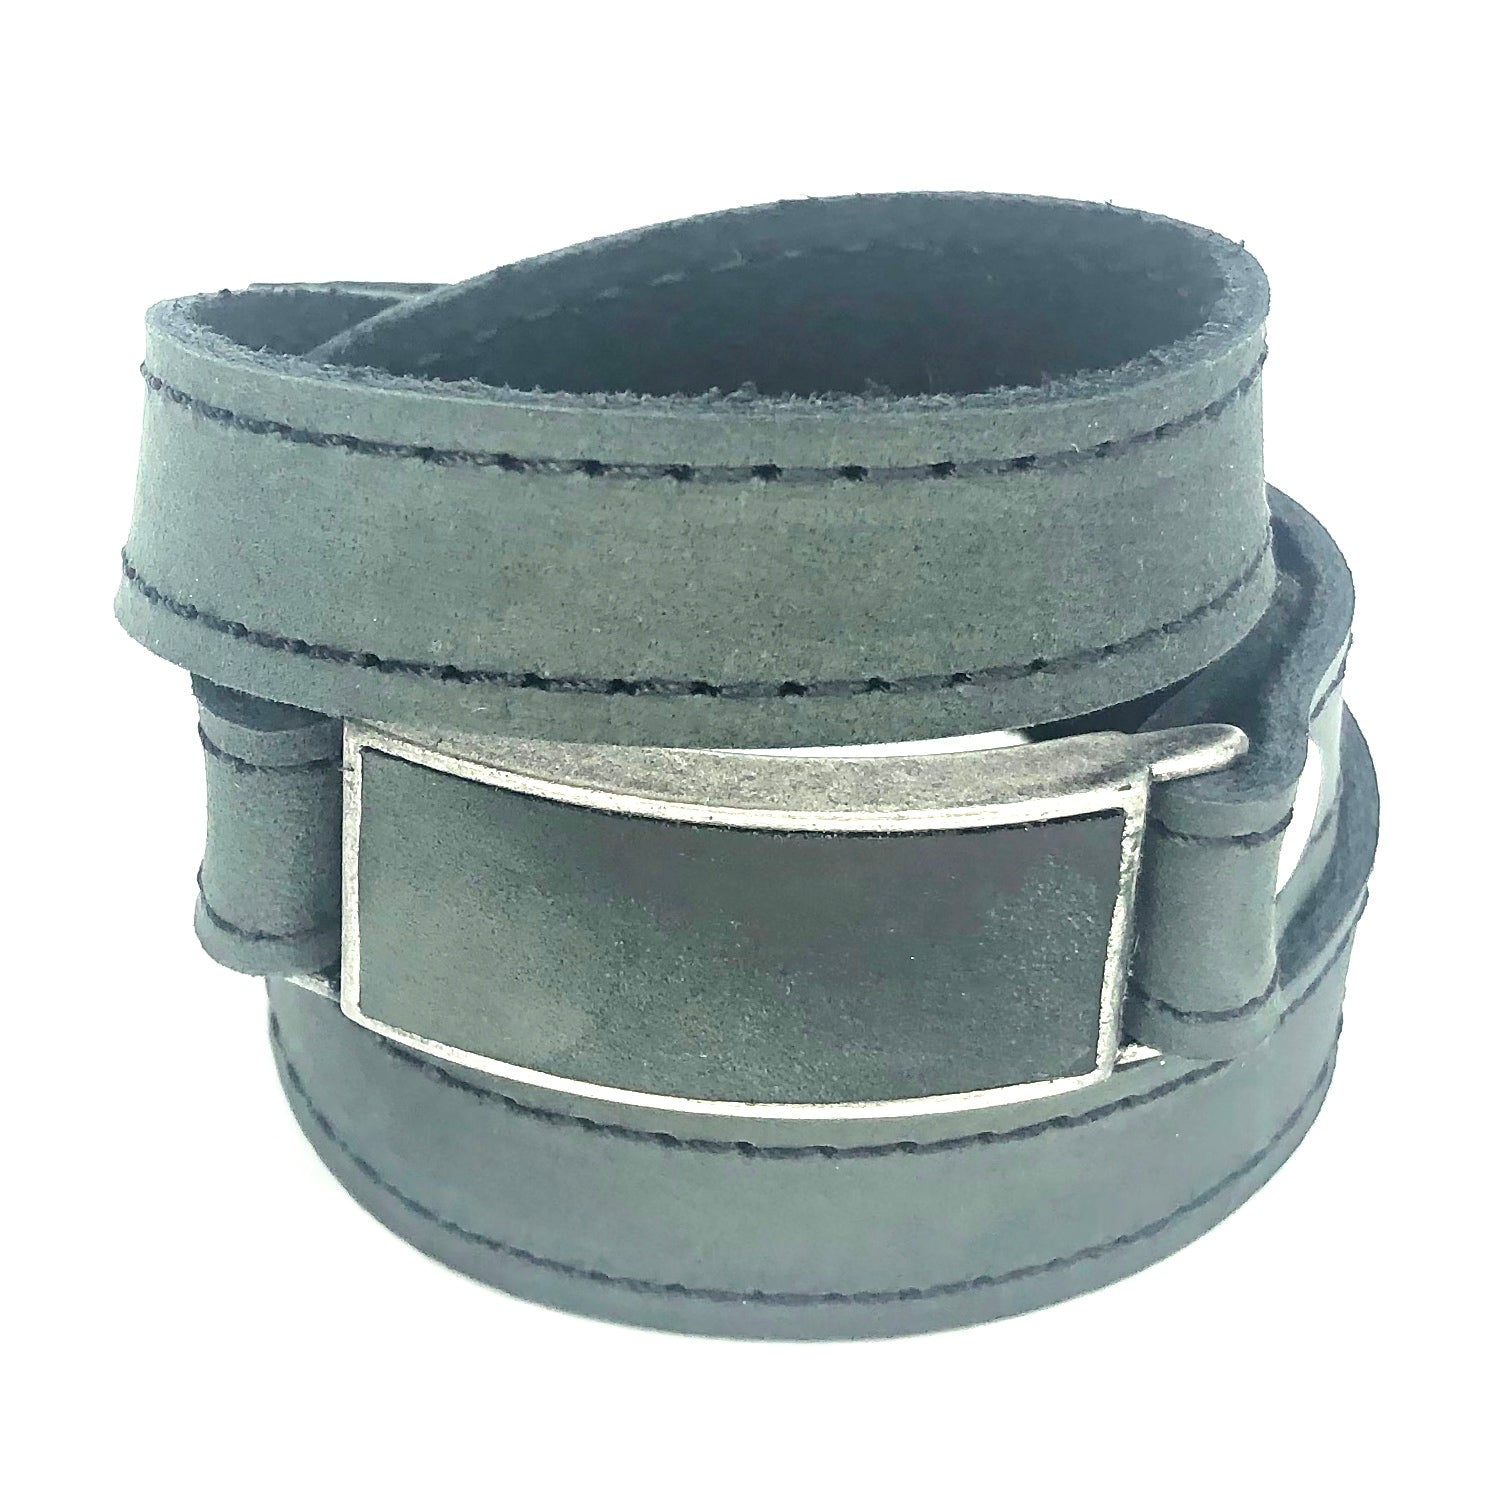 LEATHER WRAPAROUND WITH METAL LINK INLAID WITH MATCHING PIECE OF LEATHER by nyet jewelry